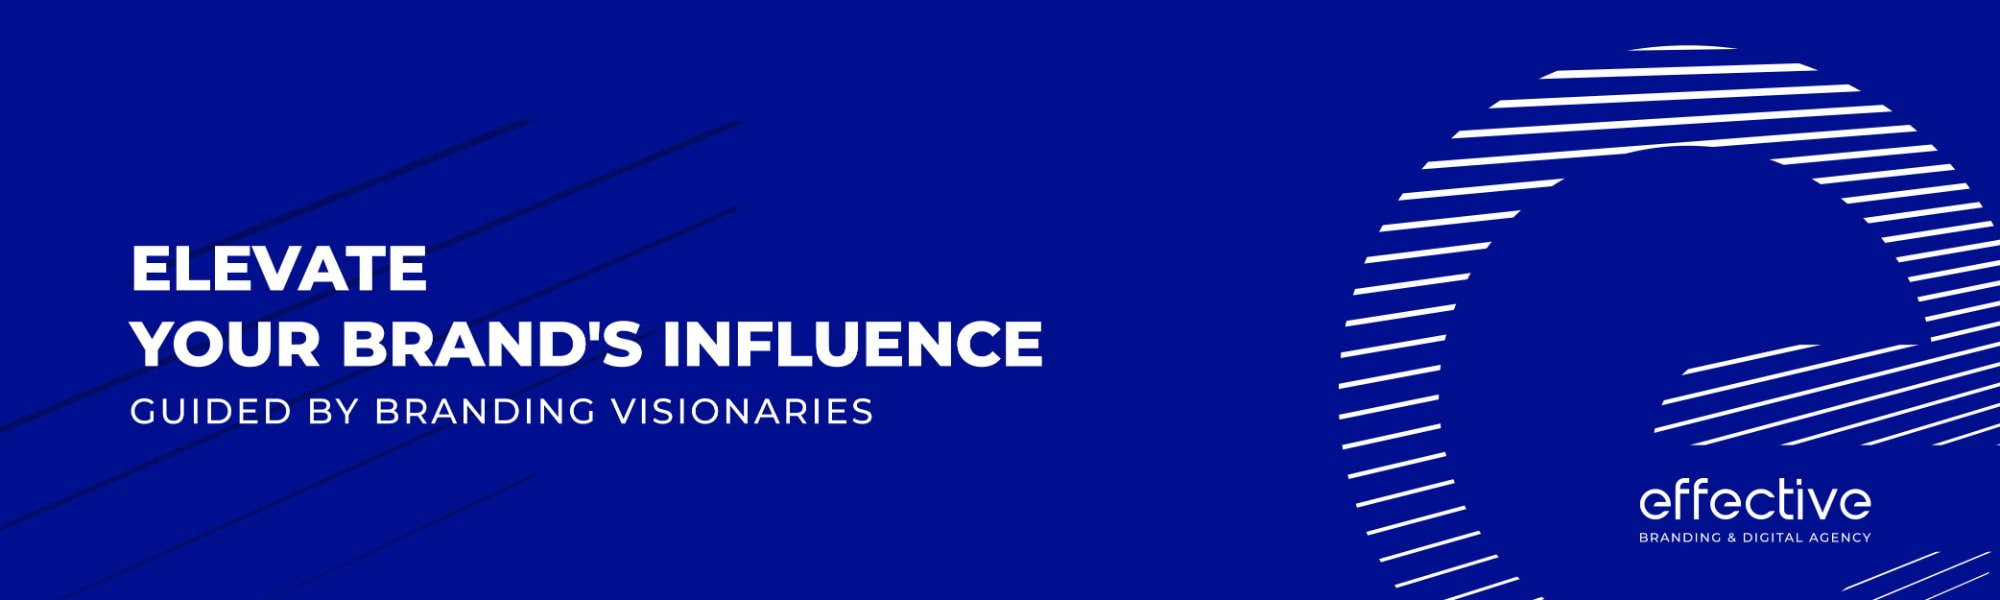 Elevate Your Brand Influence Guided by Branding Visionaries